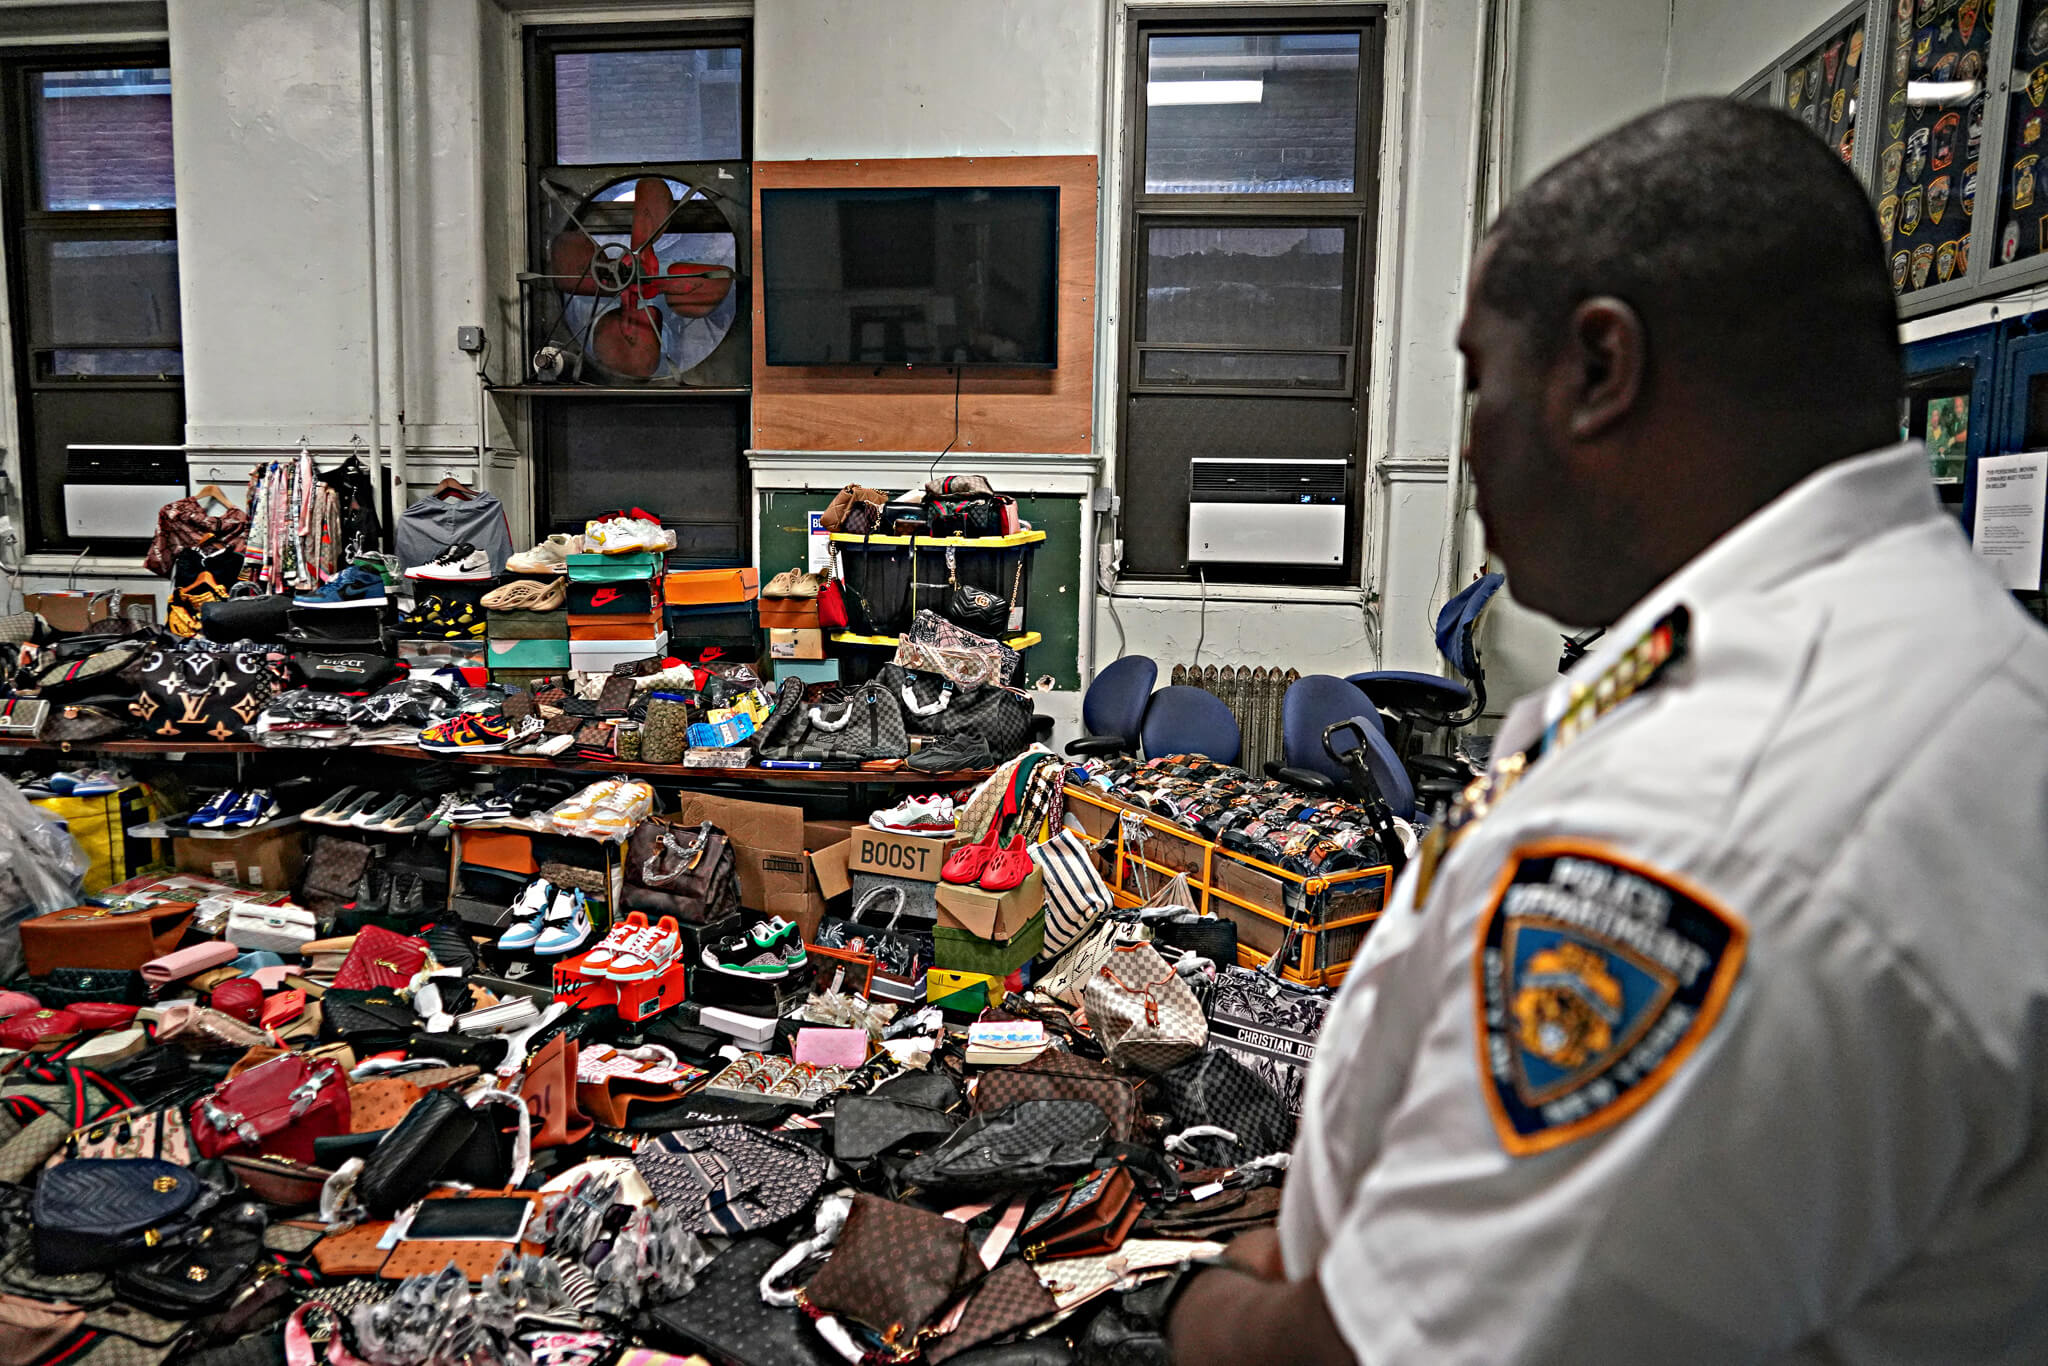 NYPD pulls off massive counterfeit goods bust on Canal Street